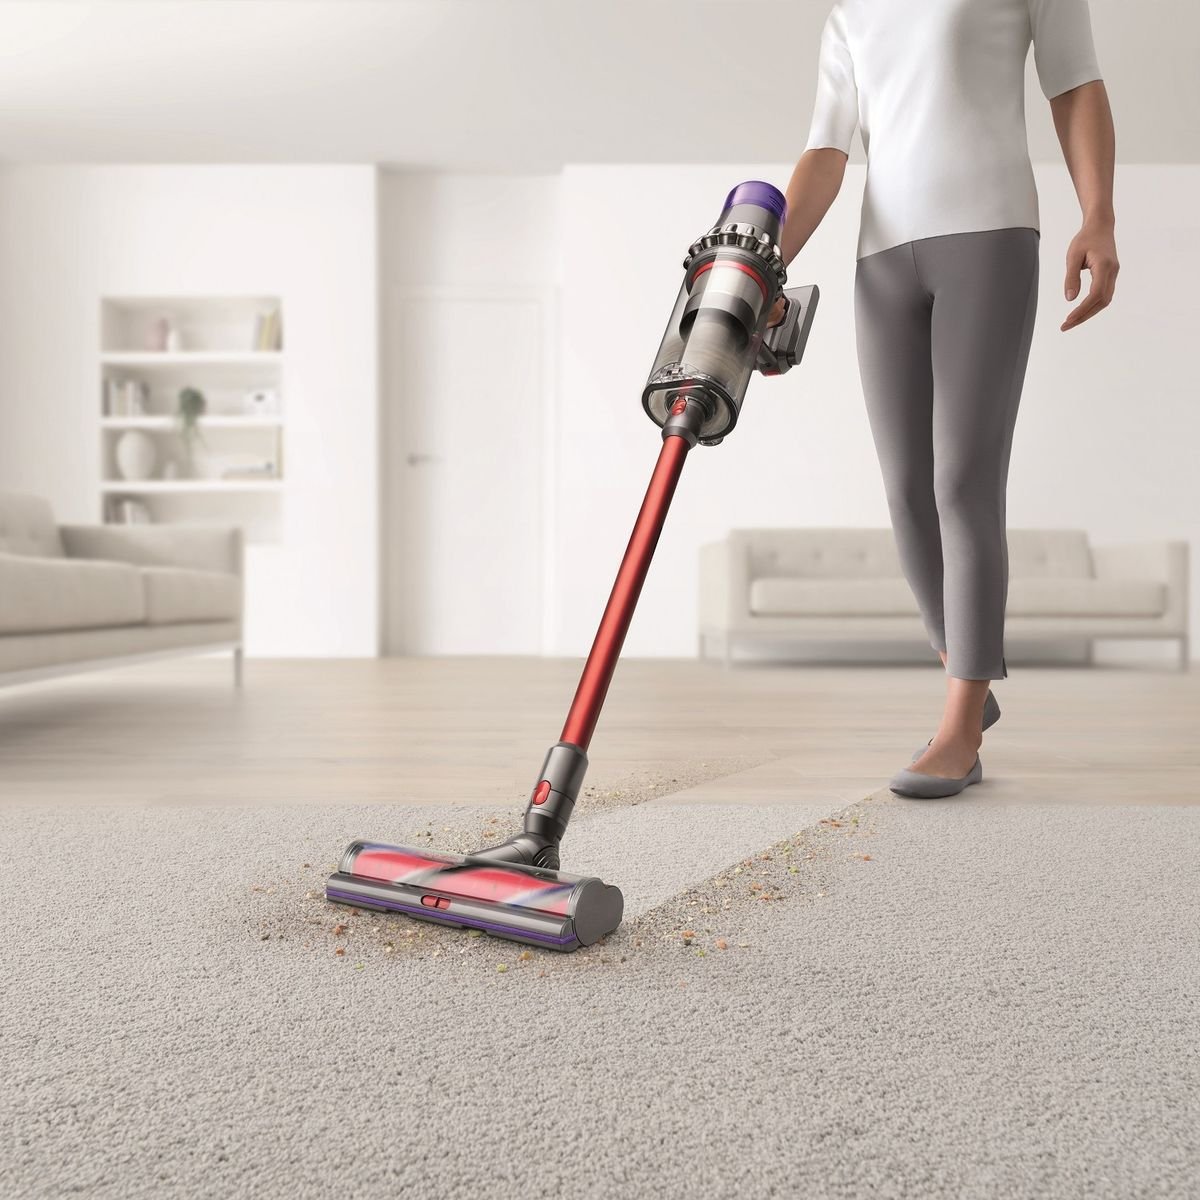 Dyson Outsize Absolute review